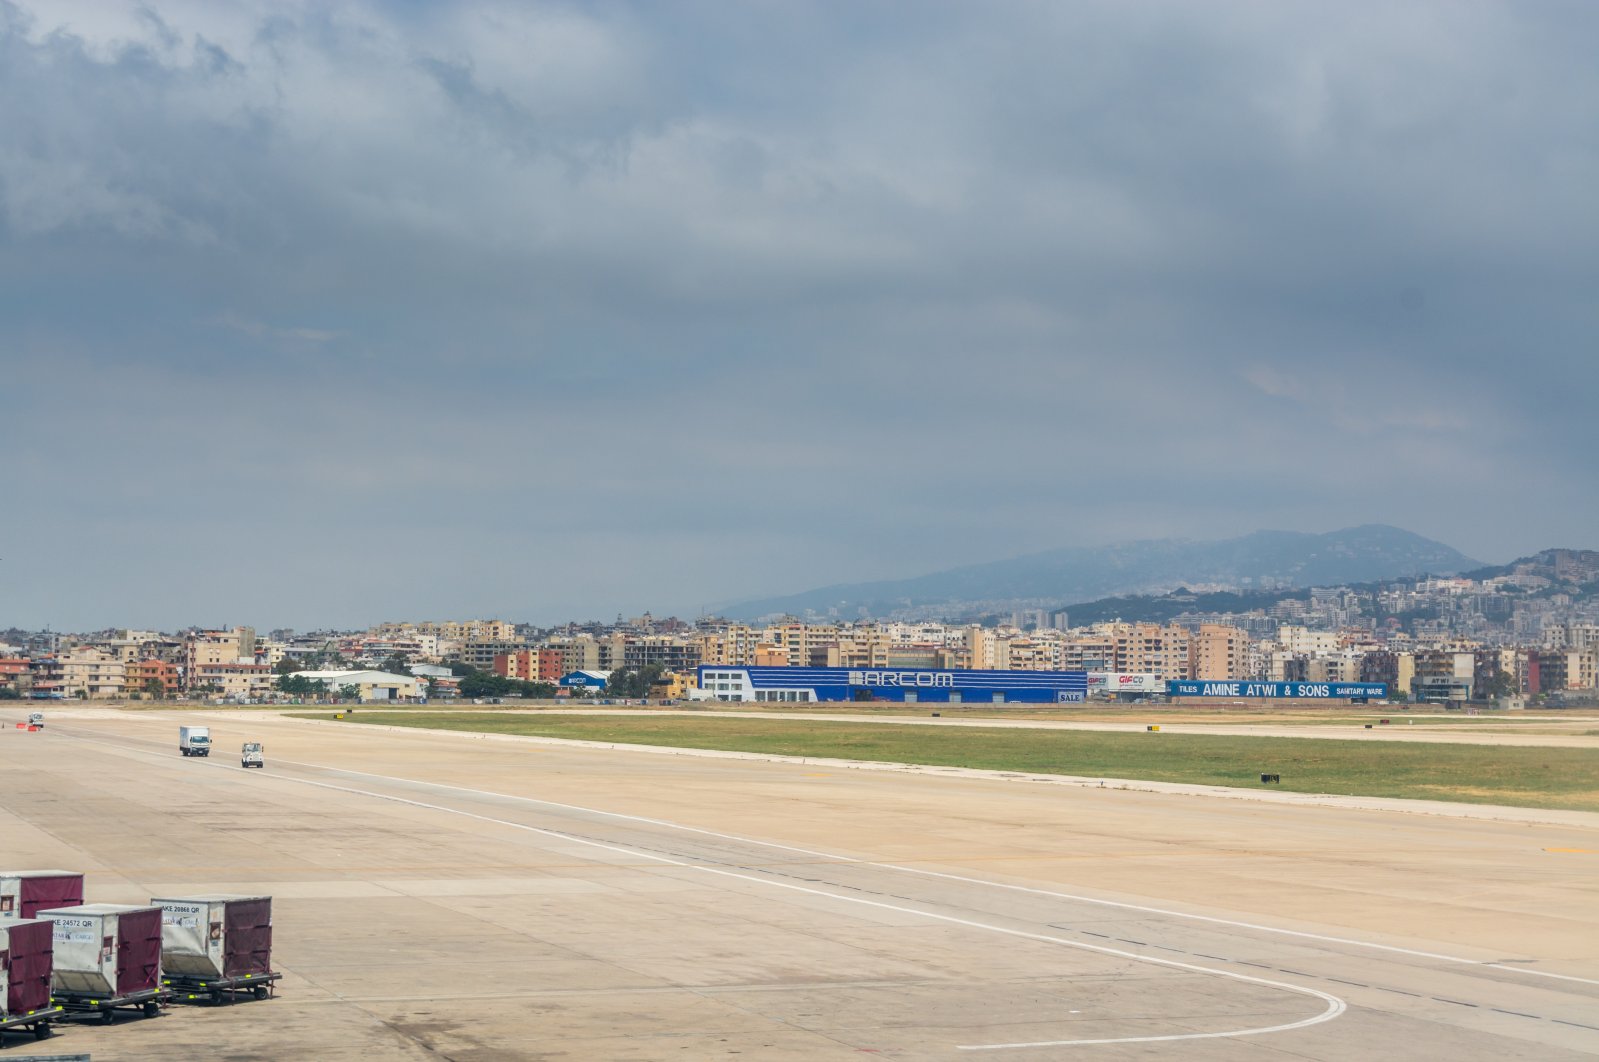 A runway at the Beirut airport. (Shutterstock File Photo)